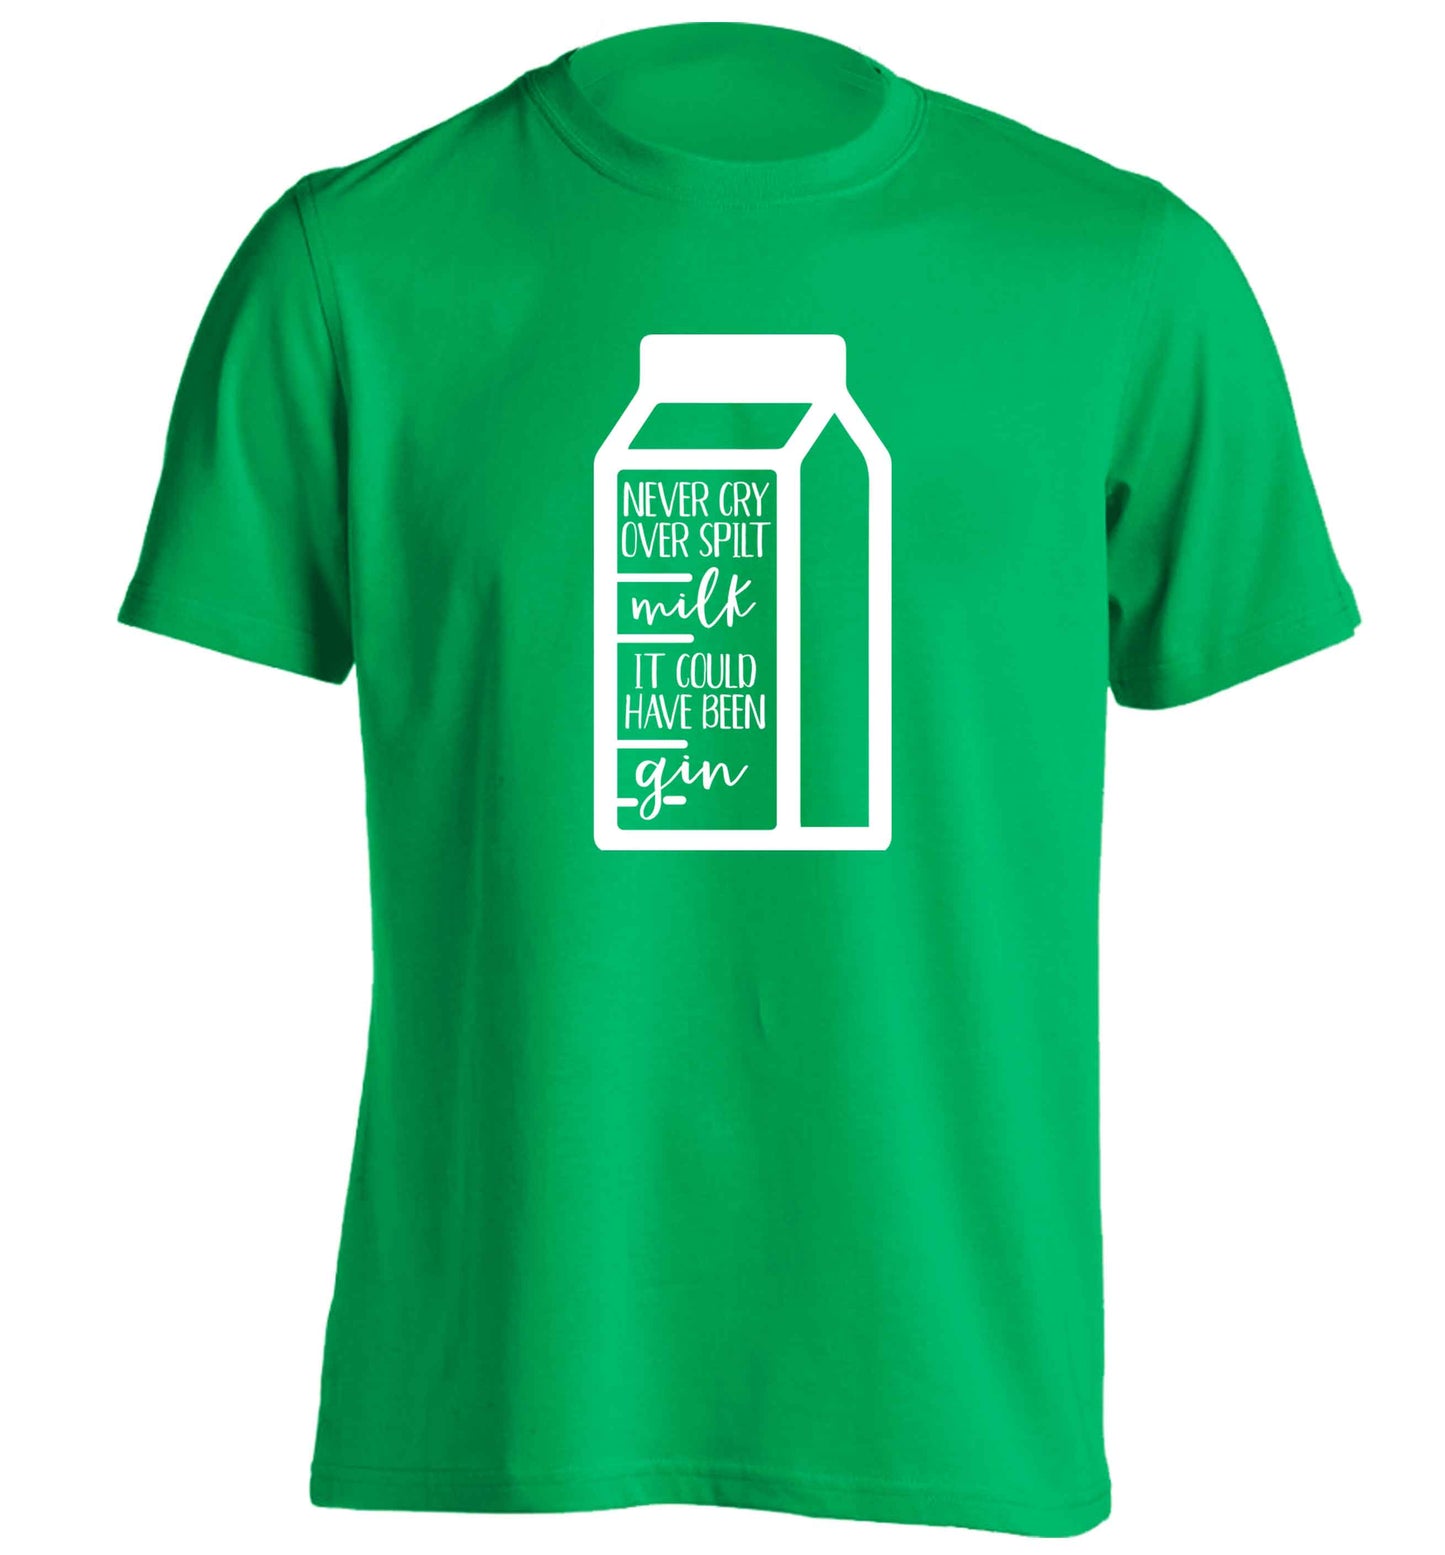 Never cry over spilt milk, it could have been gin adults unisex green Tshirt 2XL